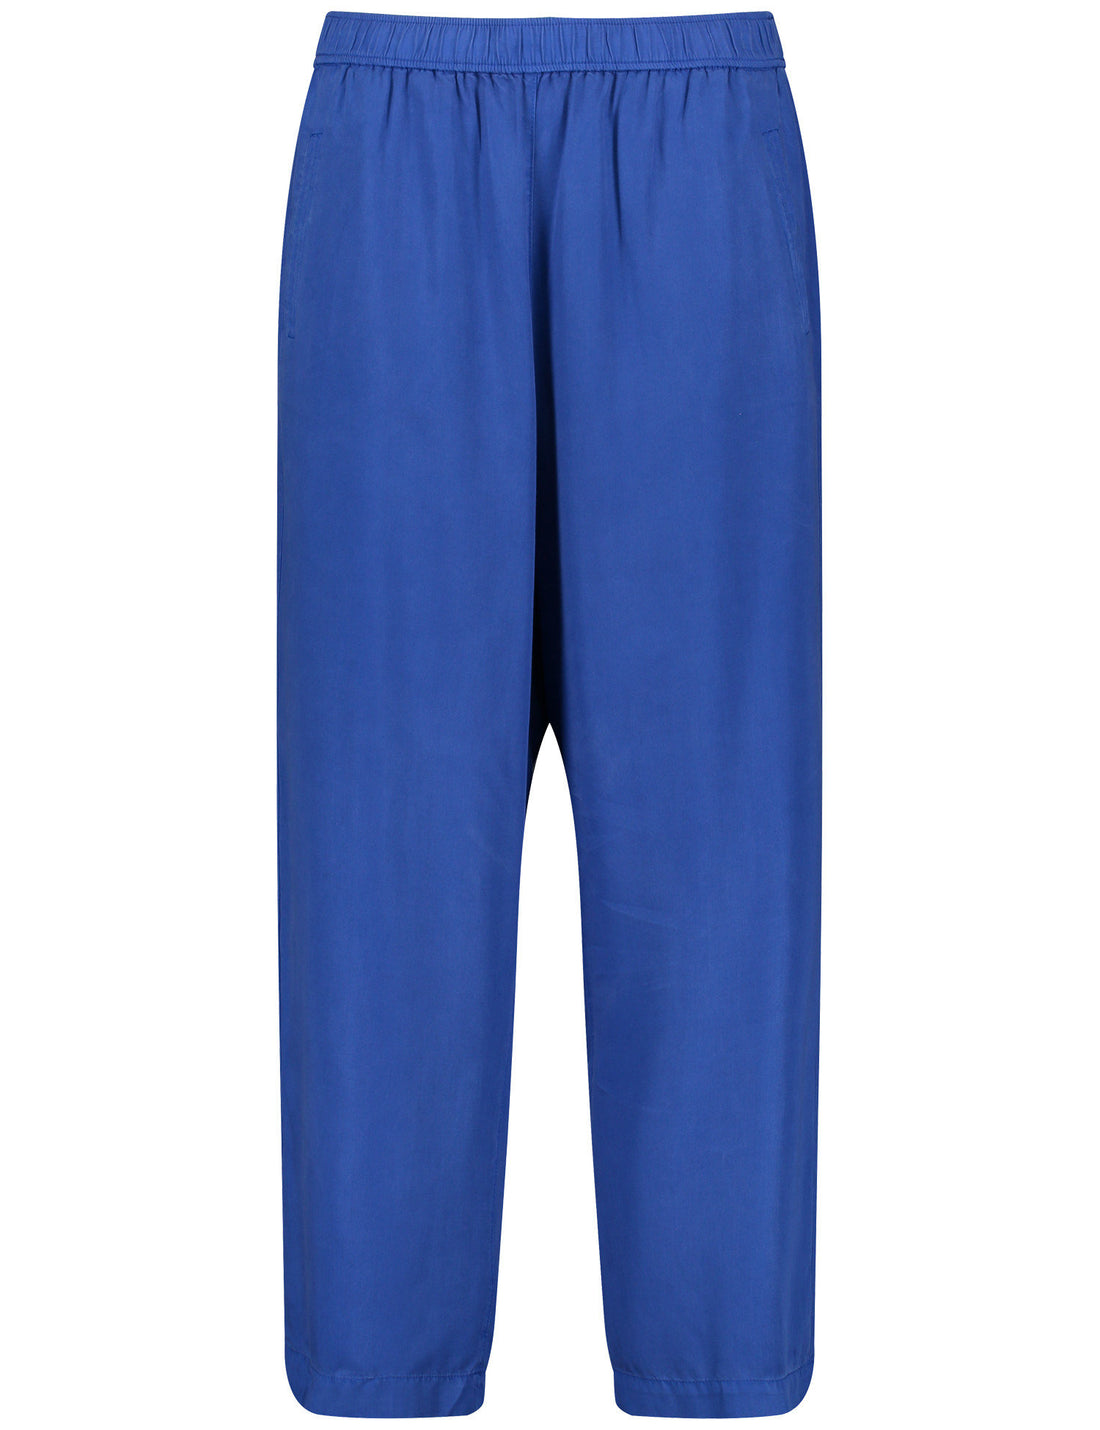 Wide Summer Trousers Made Of Lyocell_420036-21068_8860_01